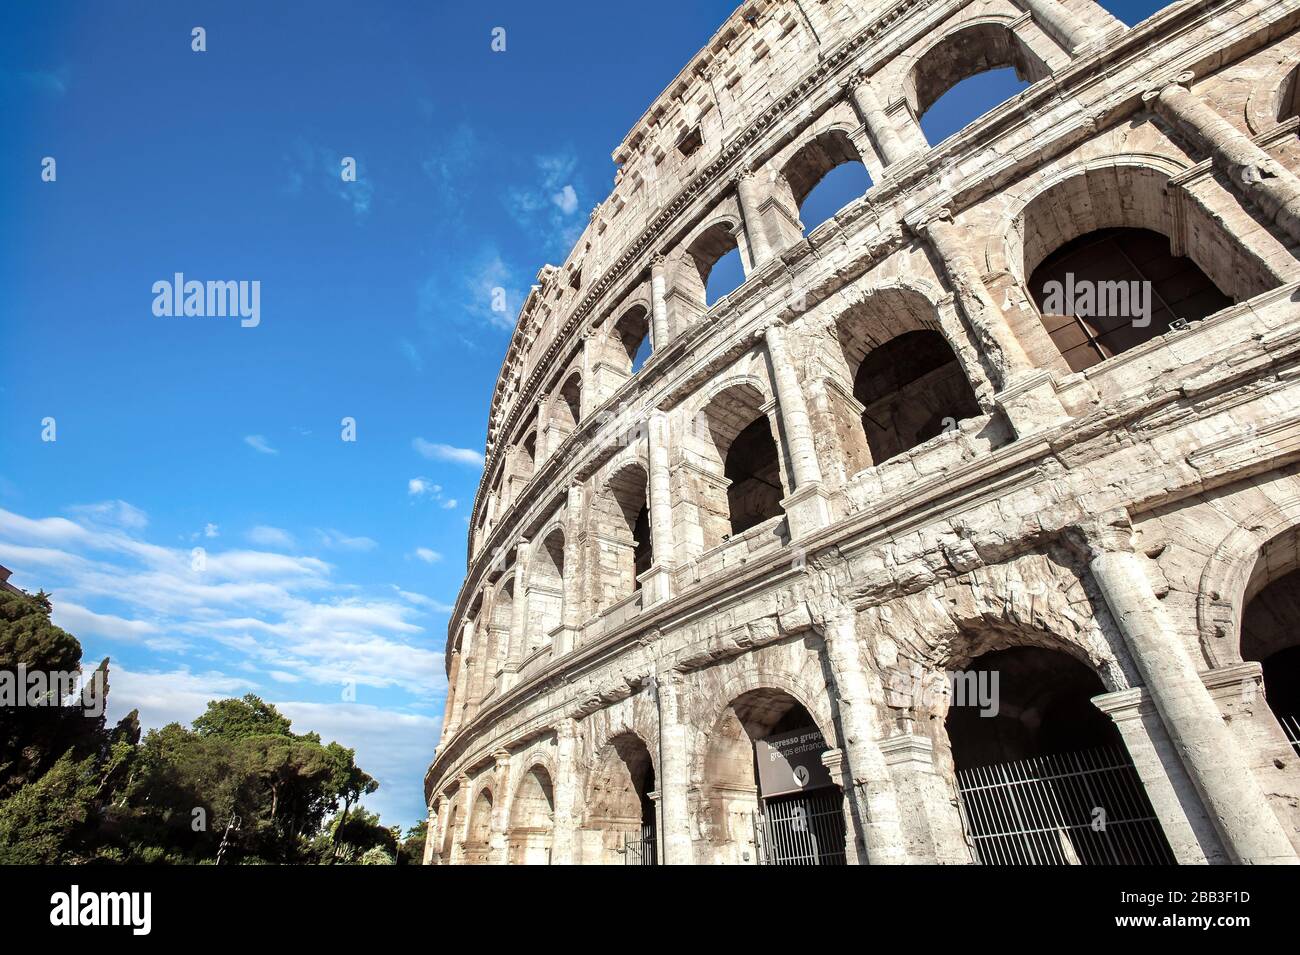 Exterior view of the four tiers and distinctive arches of the Colosseum, Rome Stock Photo